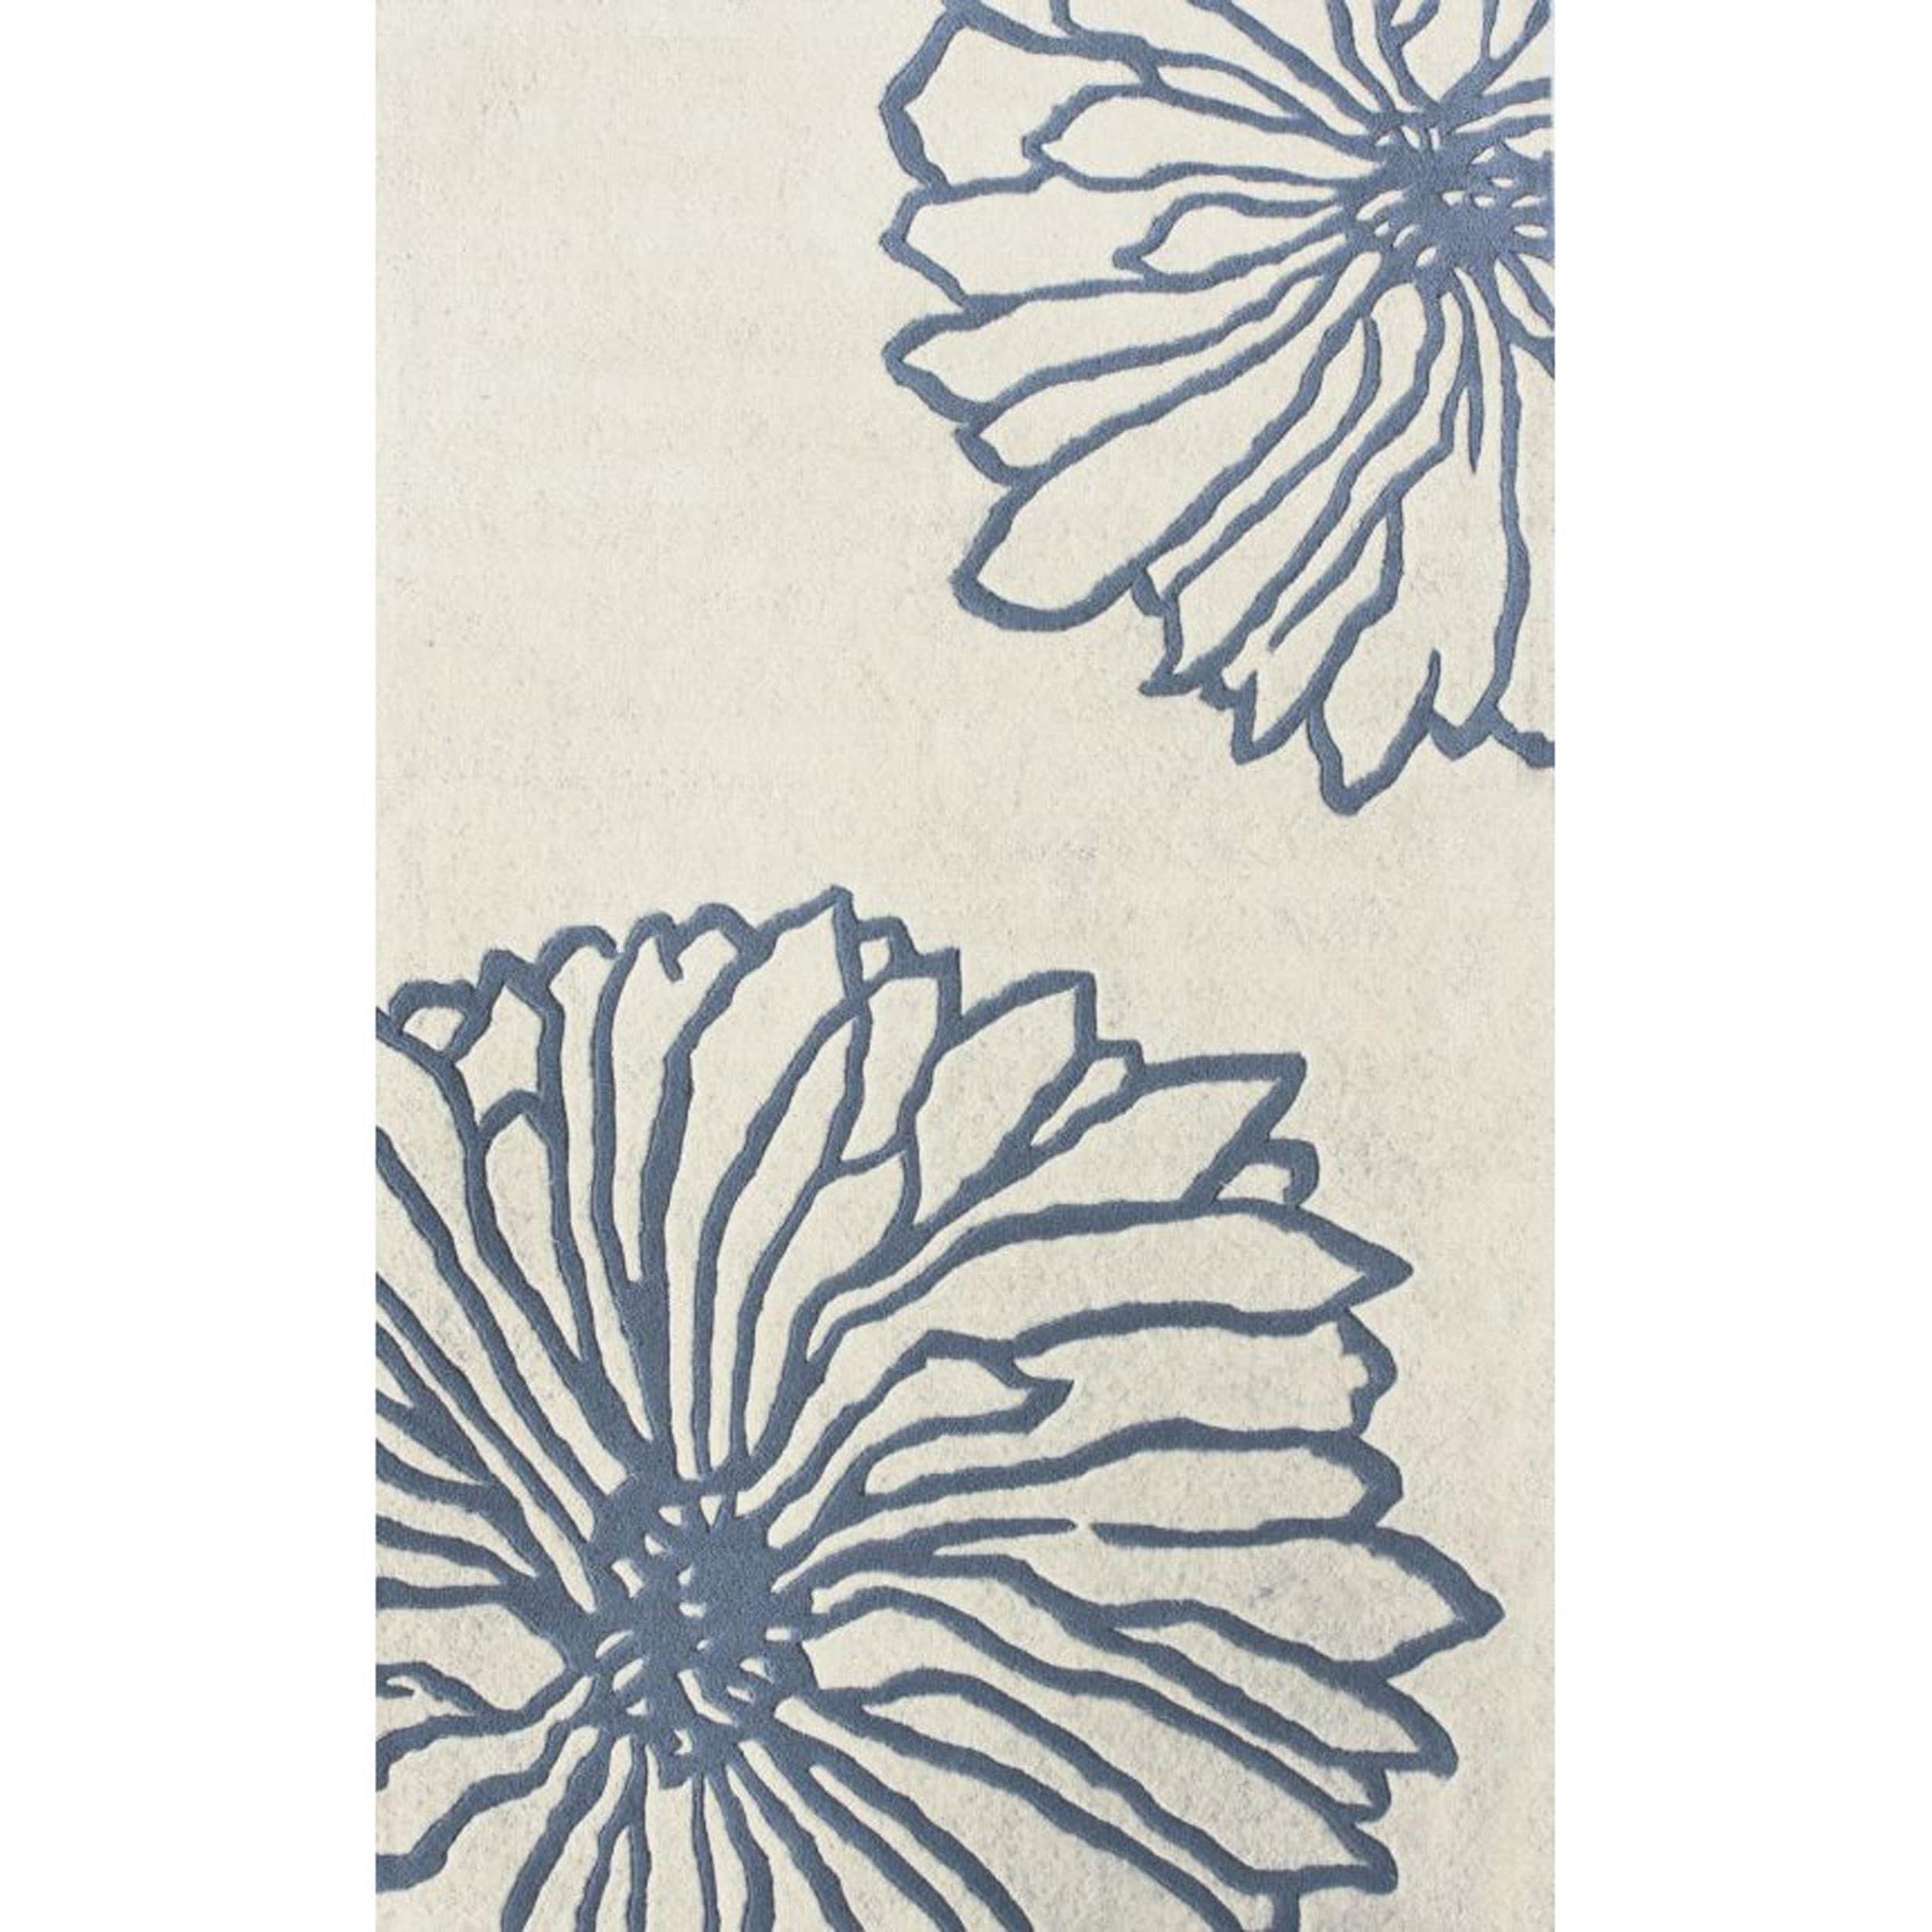 Nuloom Handmade Floral New Zealand Wool Rug (6 X 9) (BluePattern FloralTip We recommend the use of a non skid pad to keep the rug in place on smooth surfaces.All rug sizes are approximate. Due to the difference of monitor colors, some rug colors may var